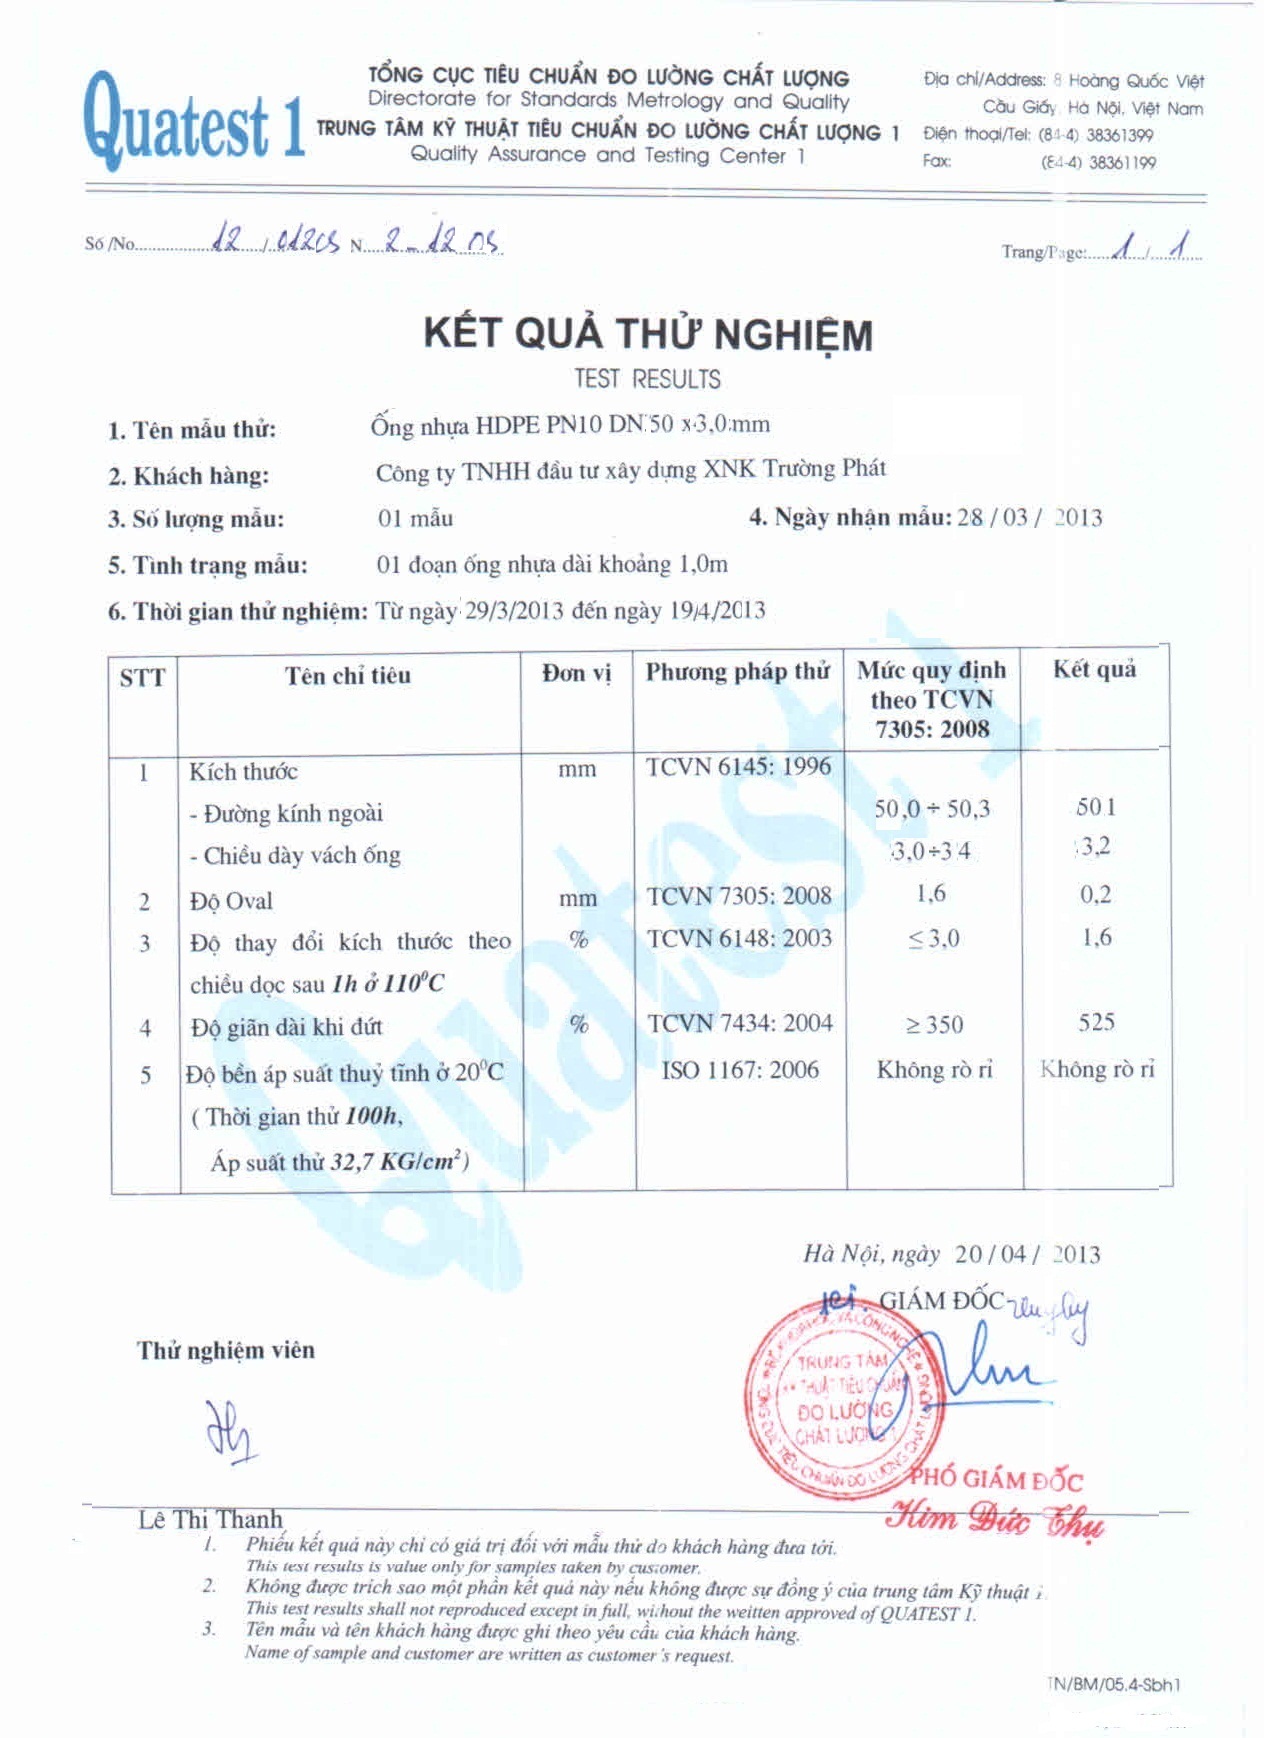 Truong Phat Super Plastic Group Joint Stock Company | Vietnam ...